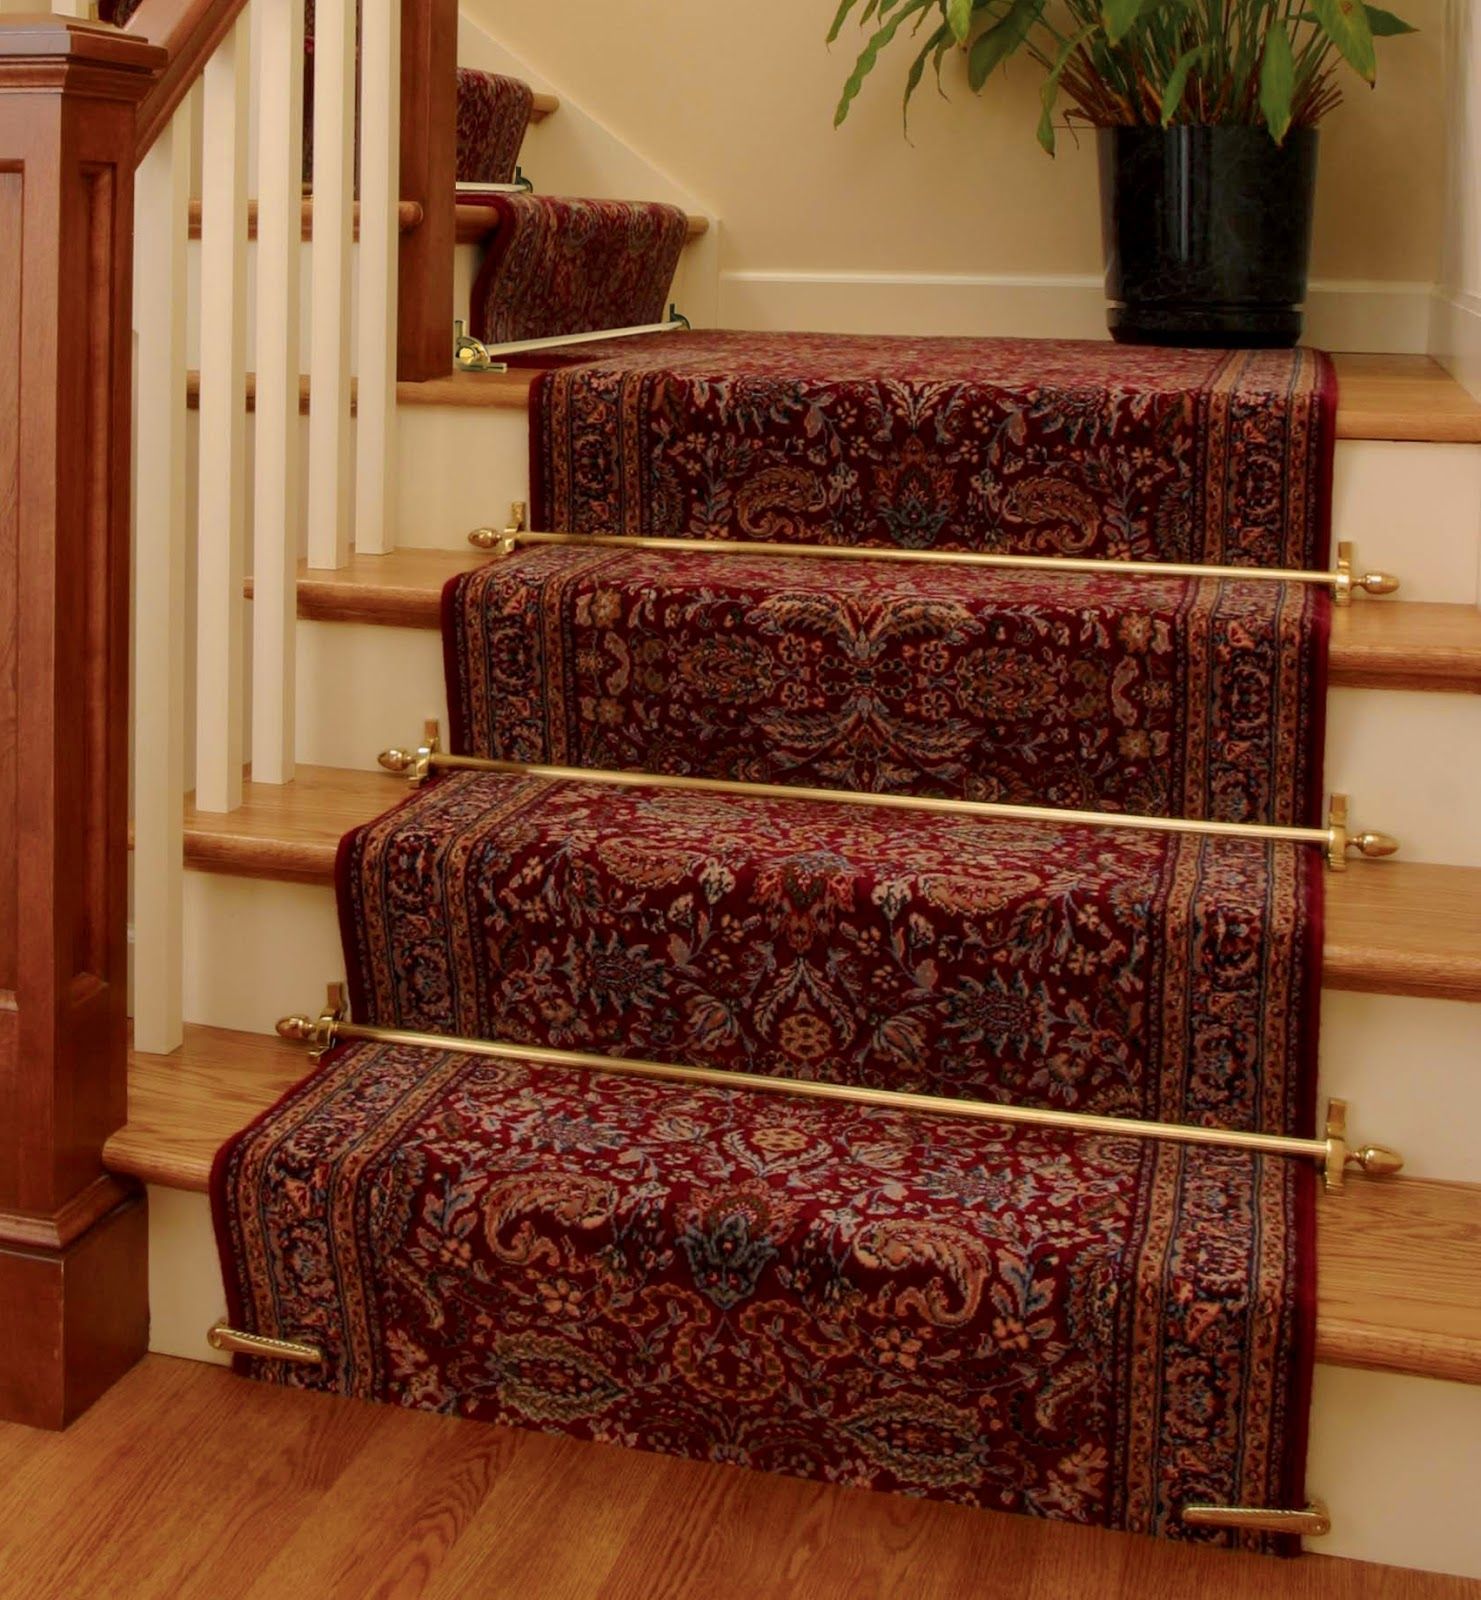 Decorative Carpet Runner With Regard To Stair And Hallway Runners (View 9 of 20)